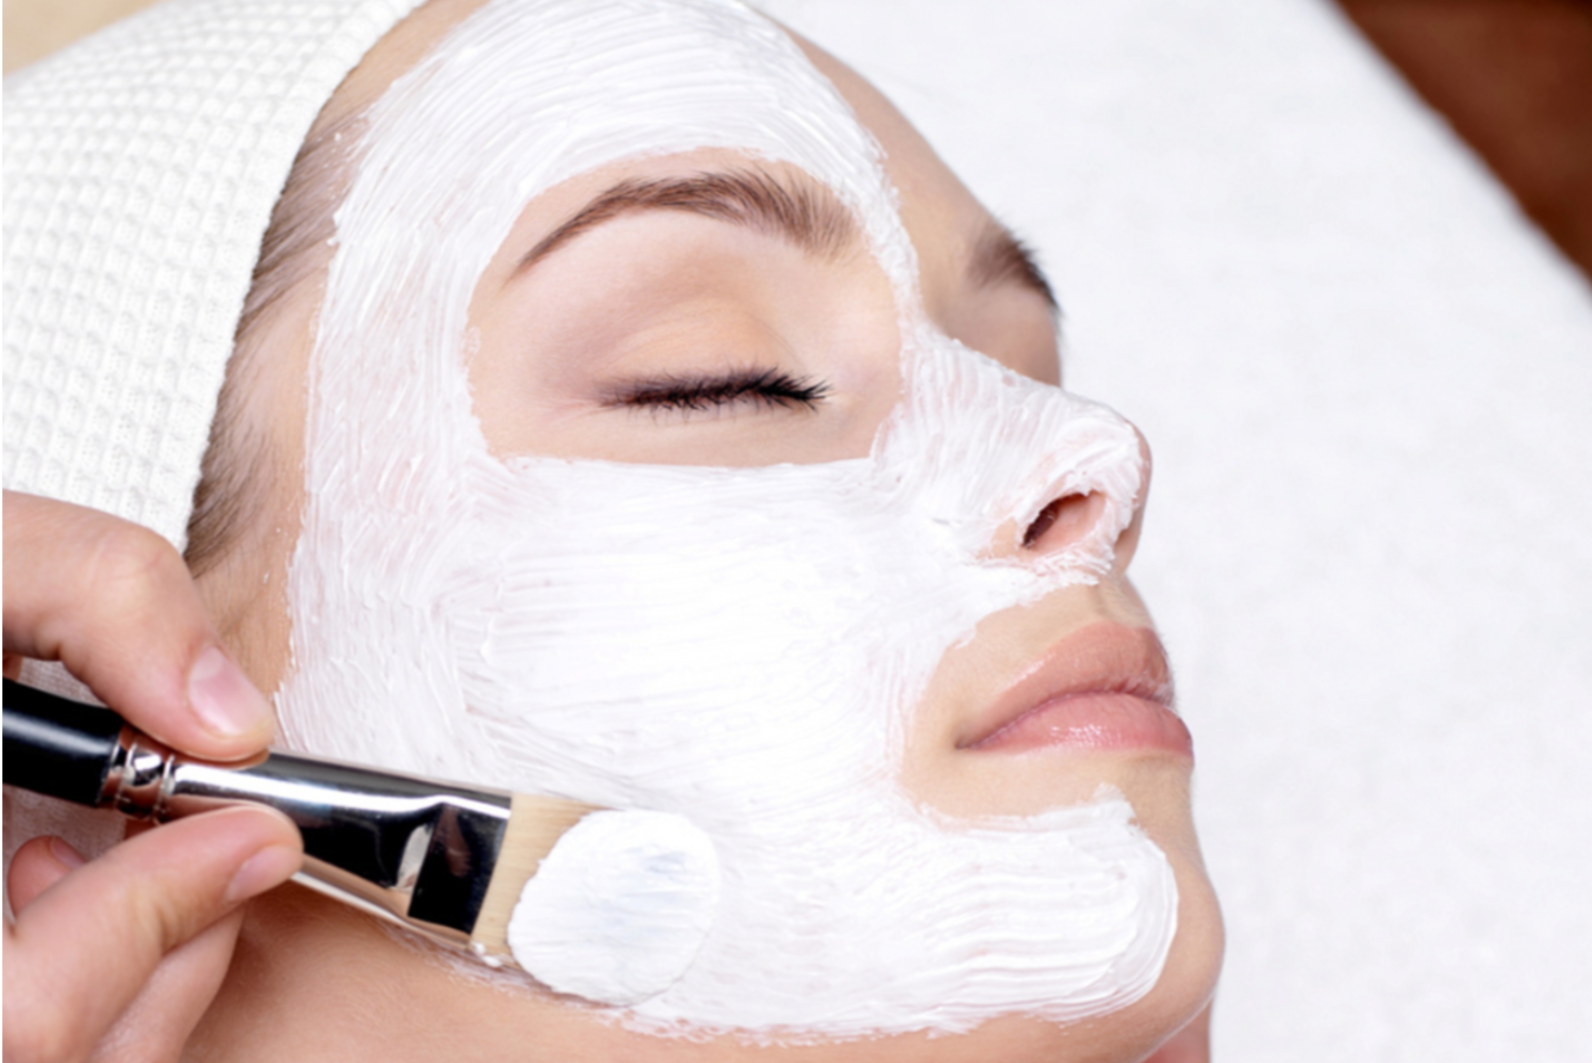 Fountain of Youth Facial - 1 1/4 hr.